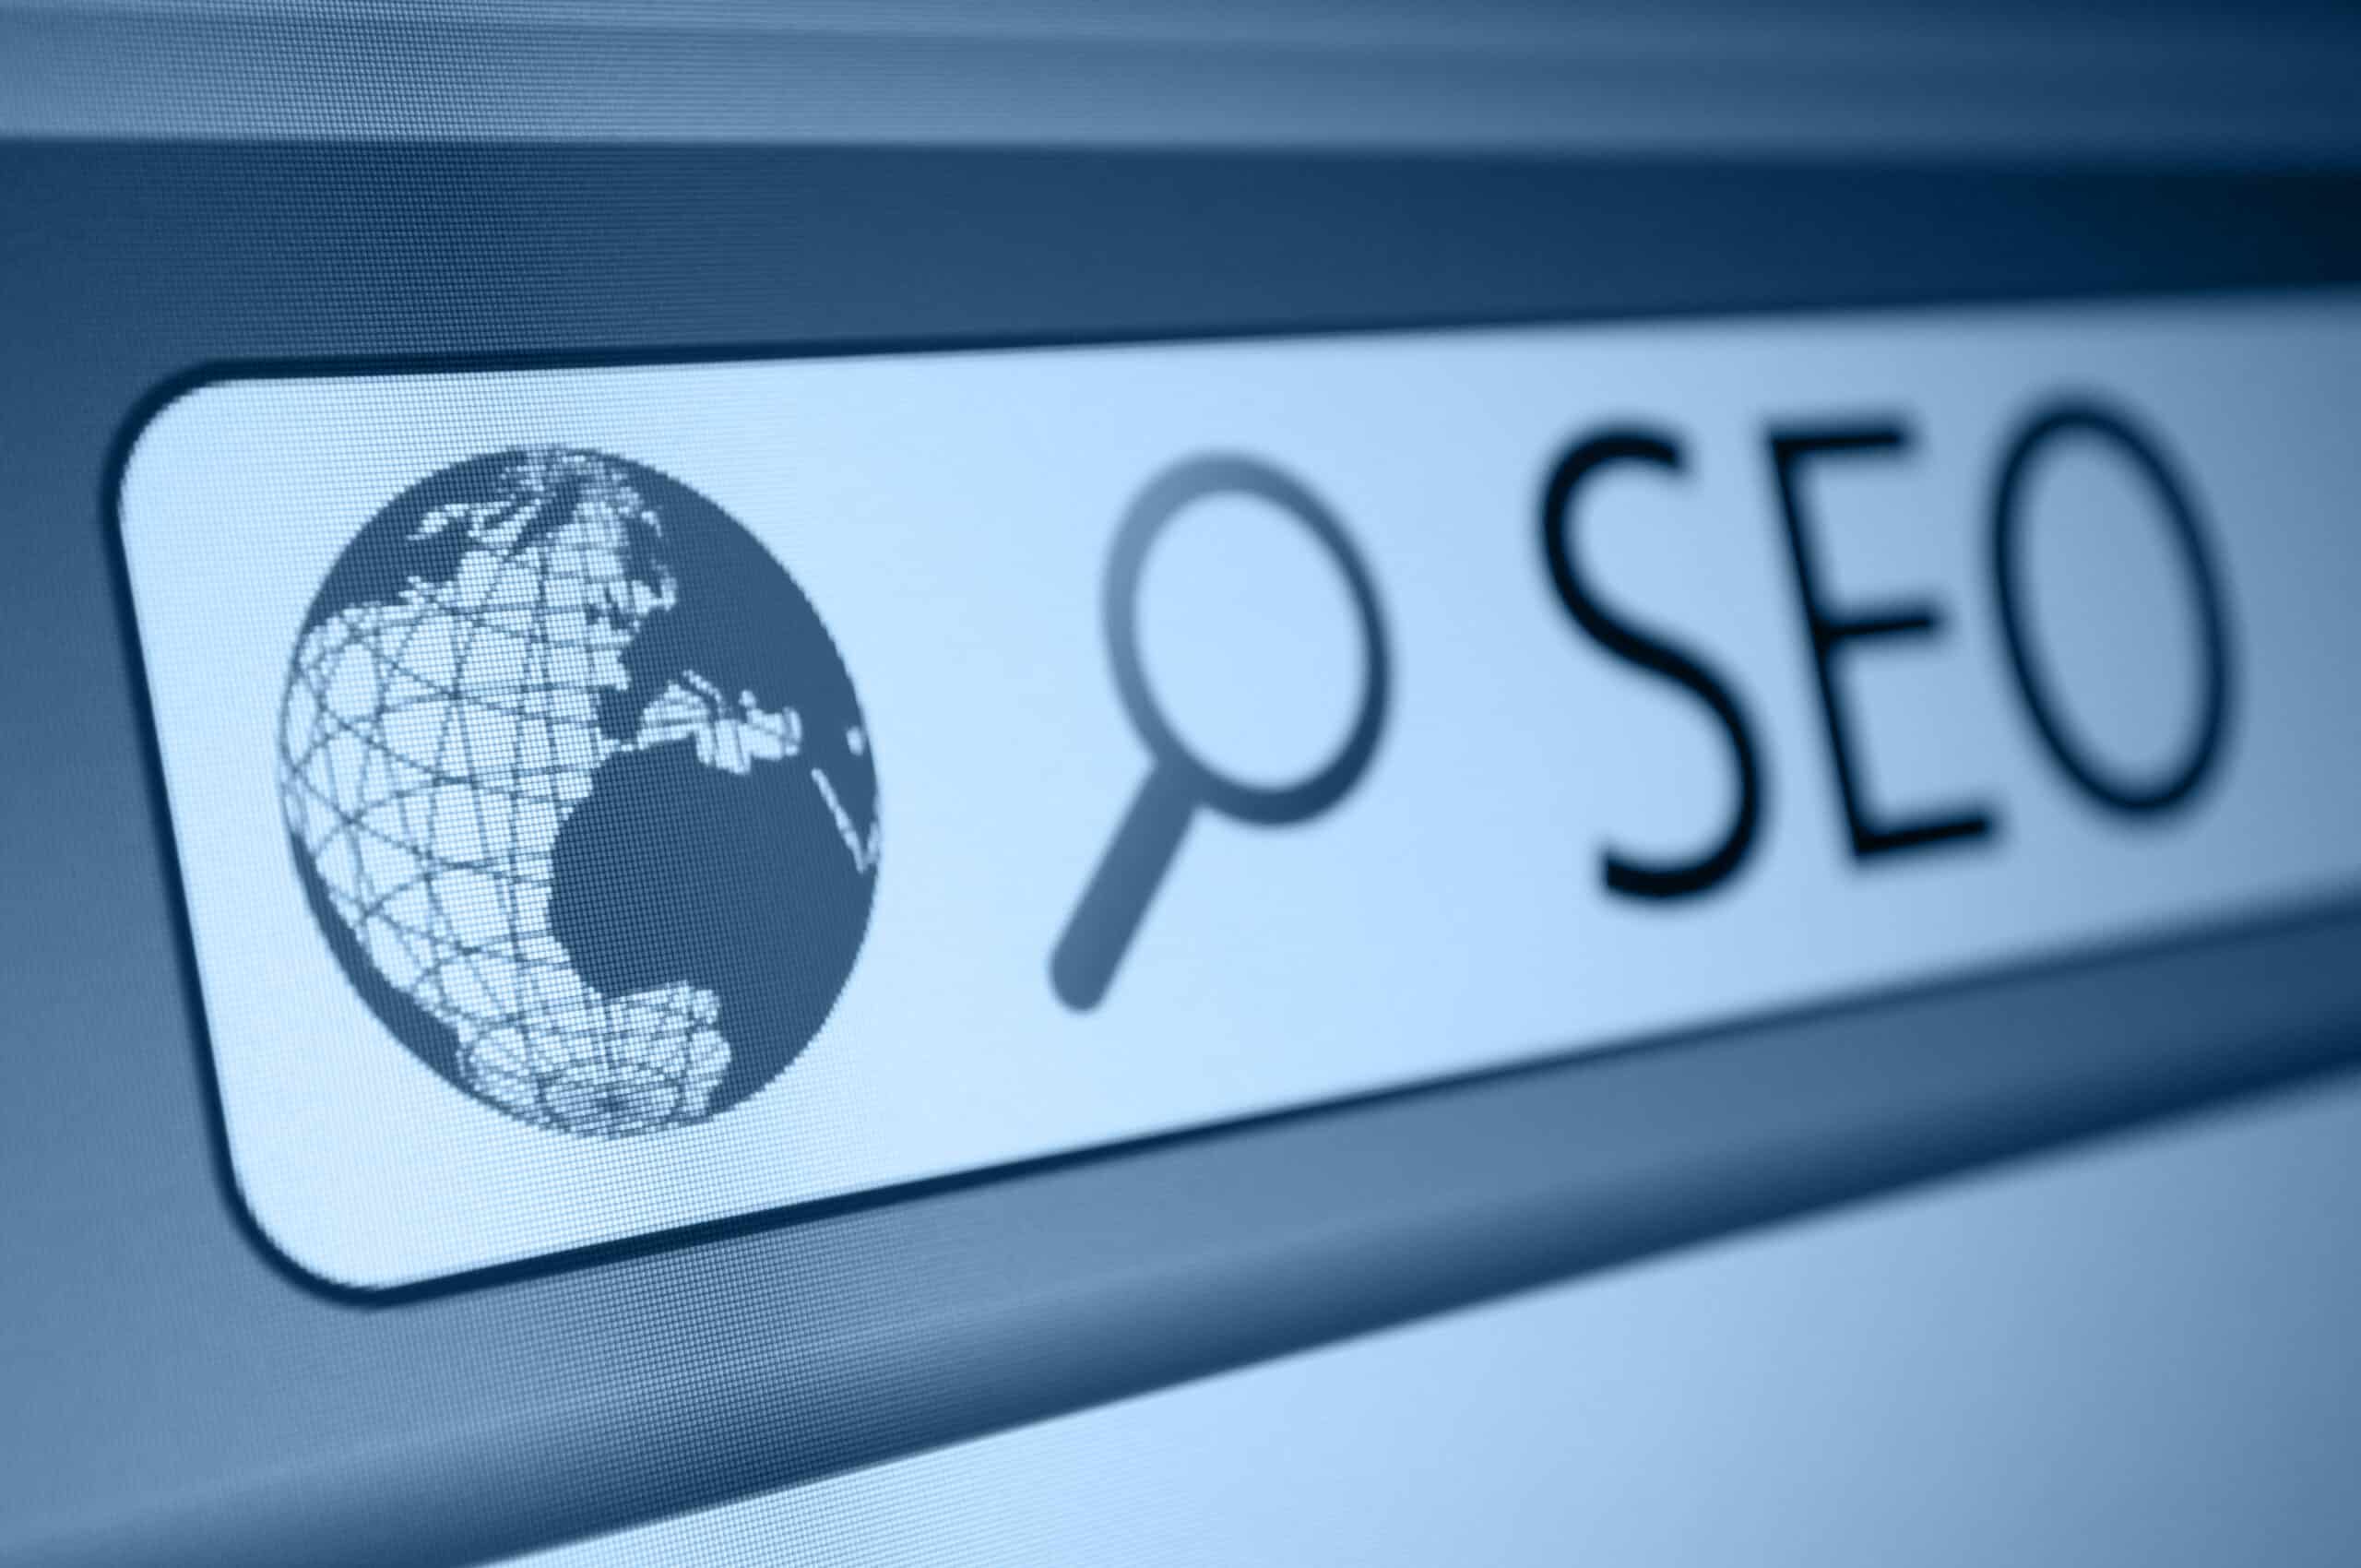 How to add Hreflang tag for international SEO